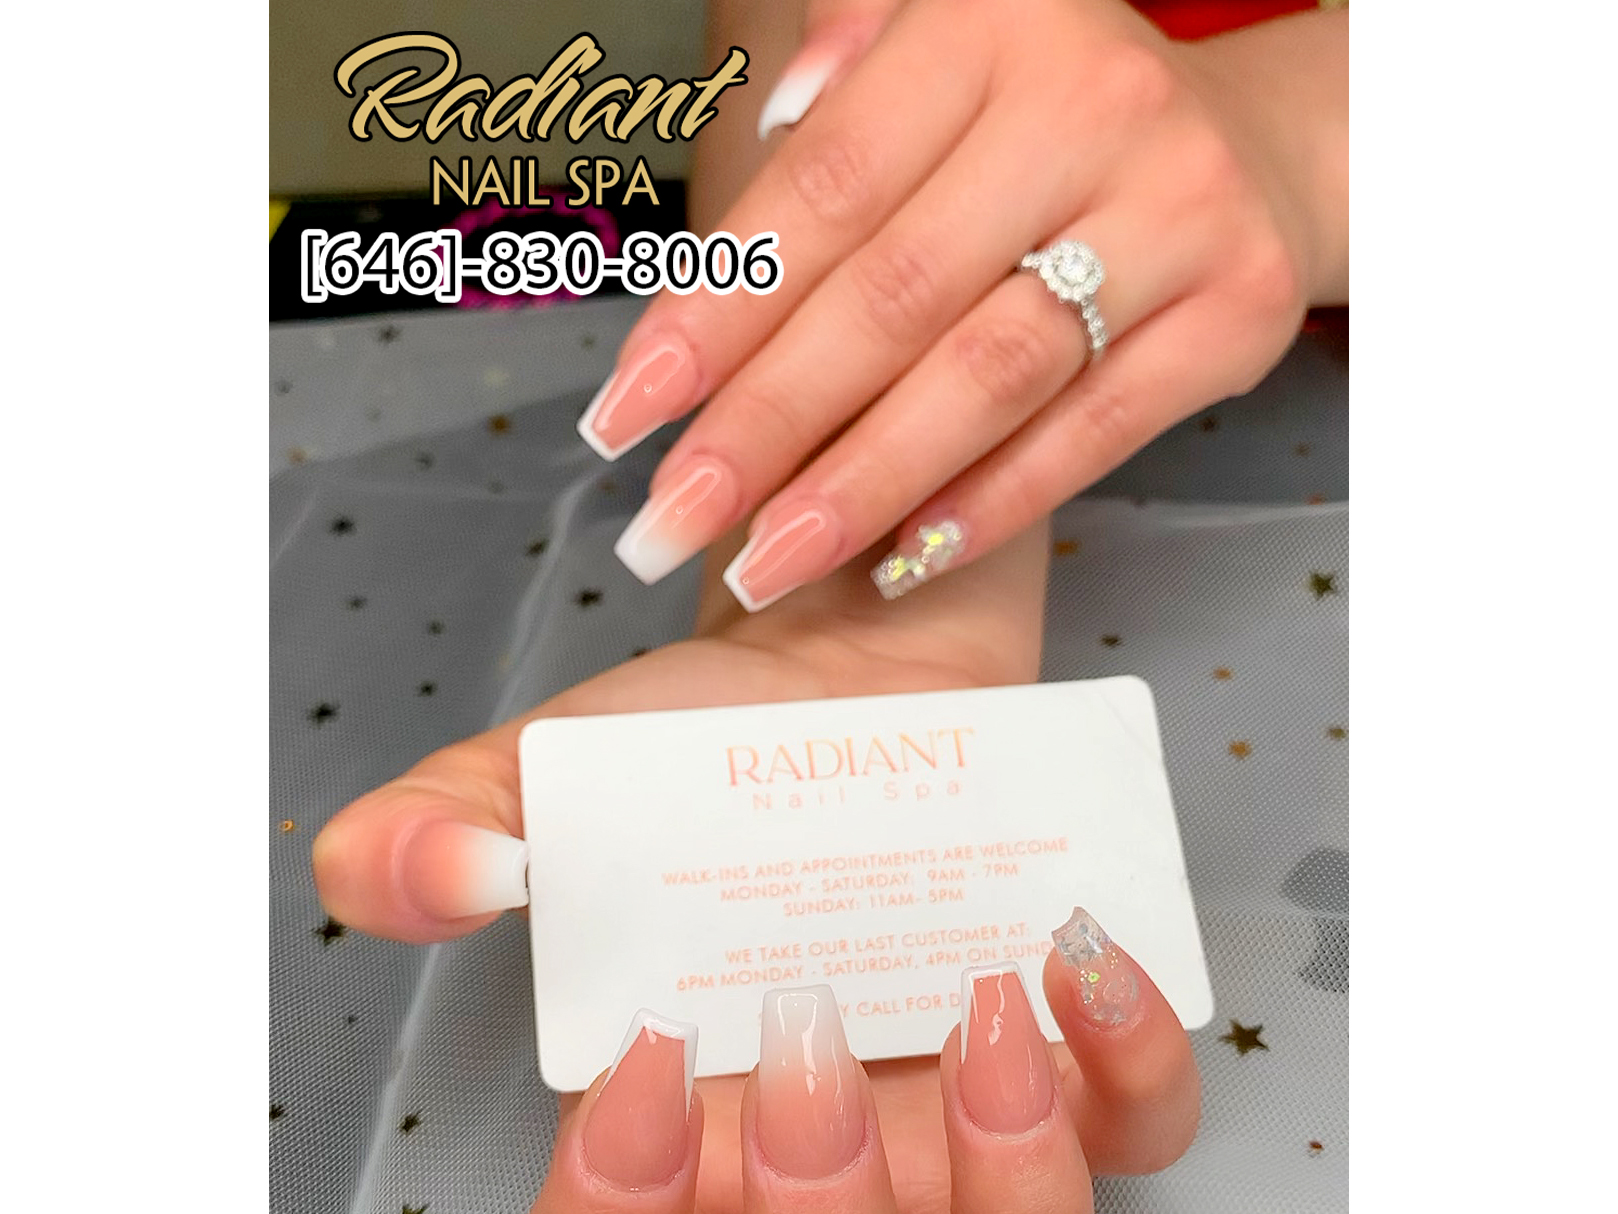 Daily carelessness sometimes causes painful chipped nails. Come to Radiant Nail  Spa, we will refresh your stressful hand and foot with rejuvenating mani &  pedi | Creative Nails World